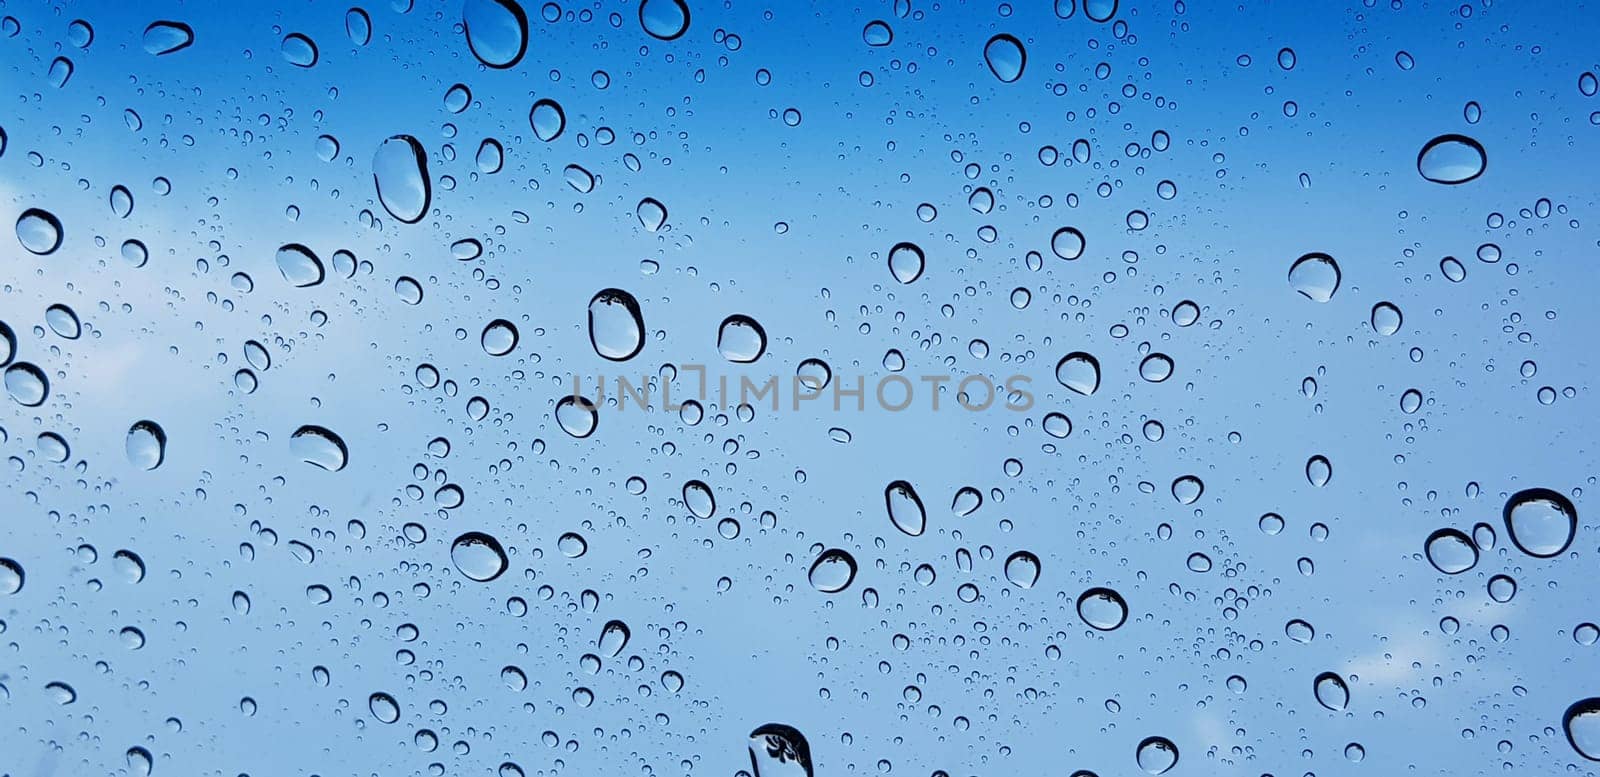 Water droplets perspective through window glass surface against blue sky good for multimedia content by antoksena